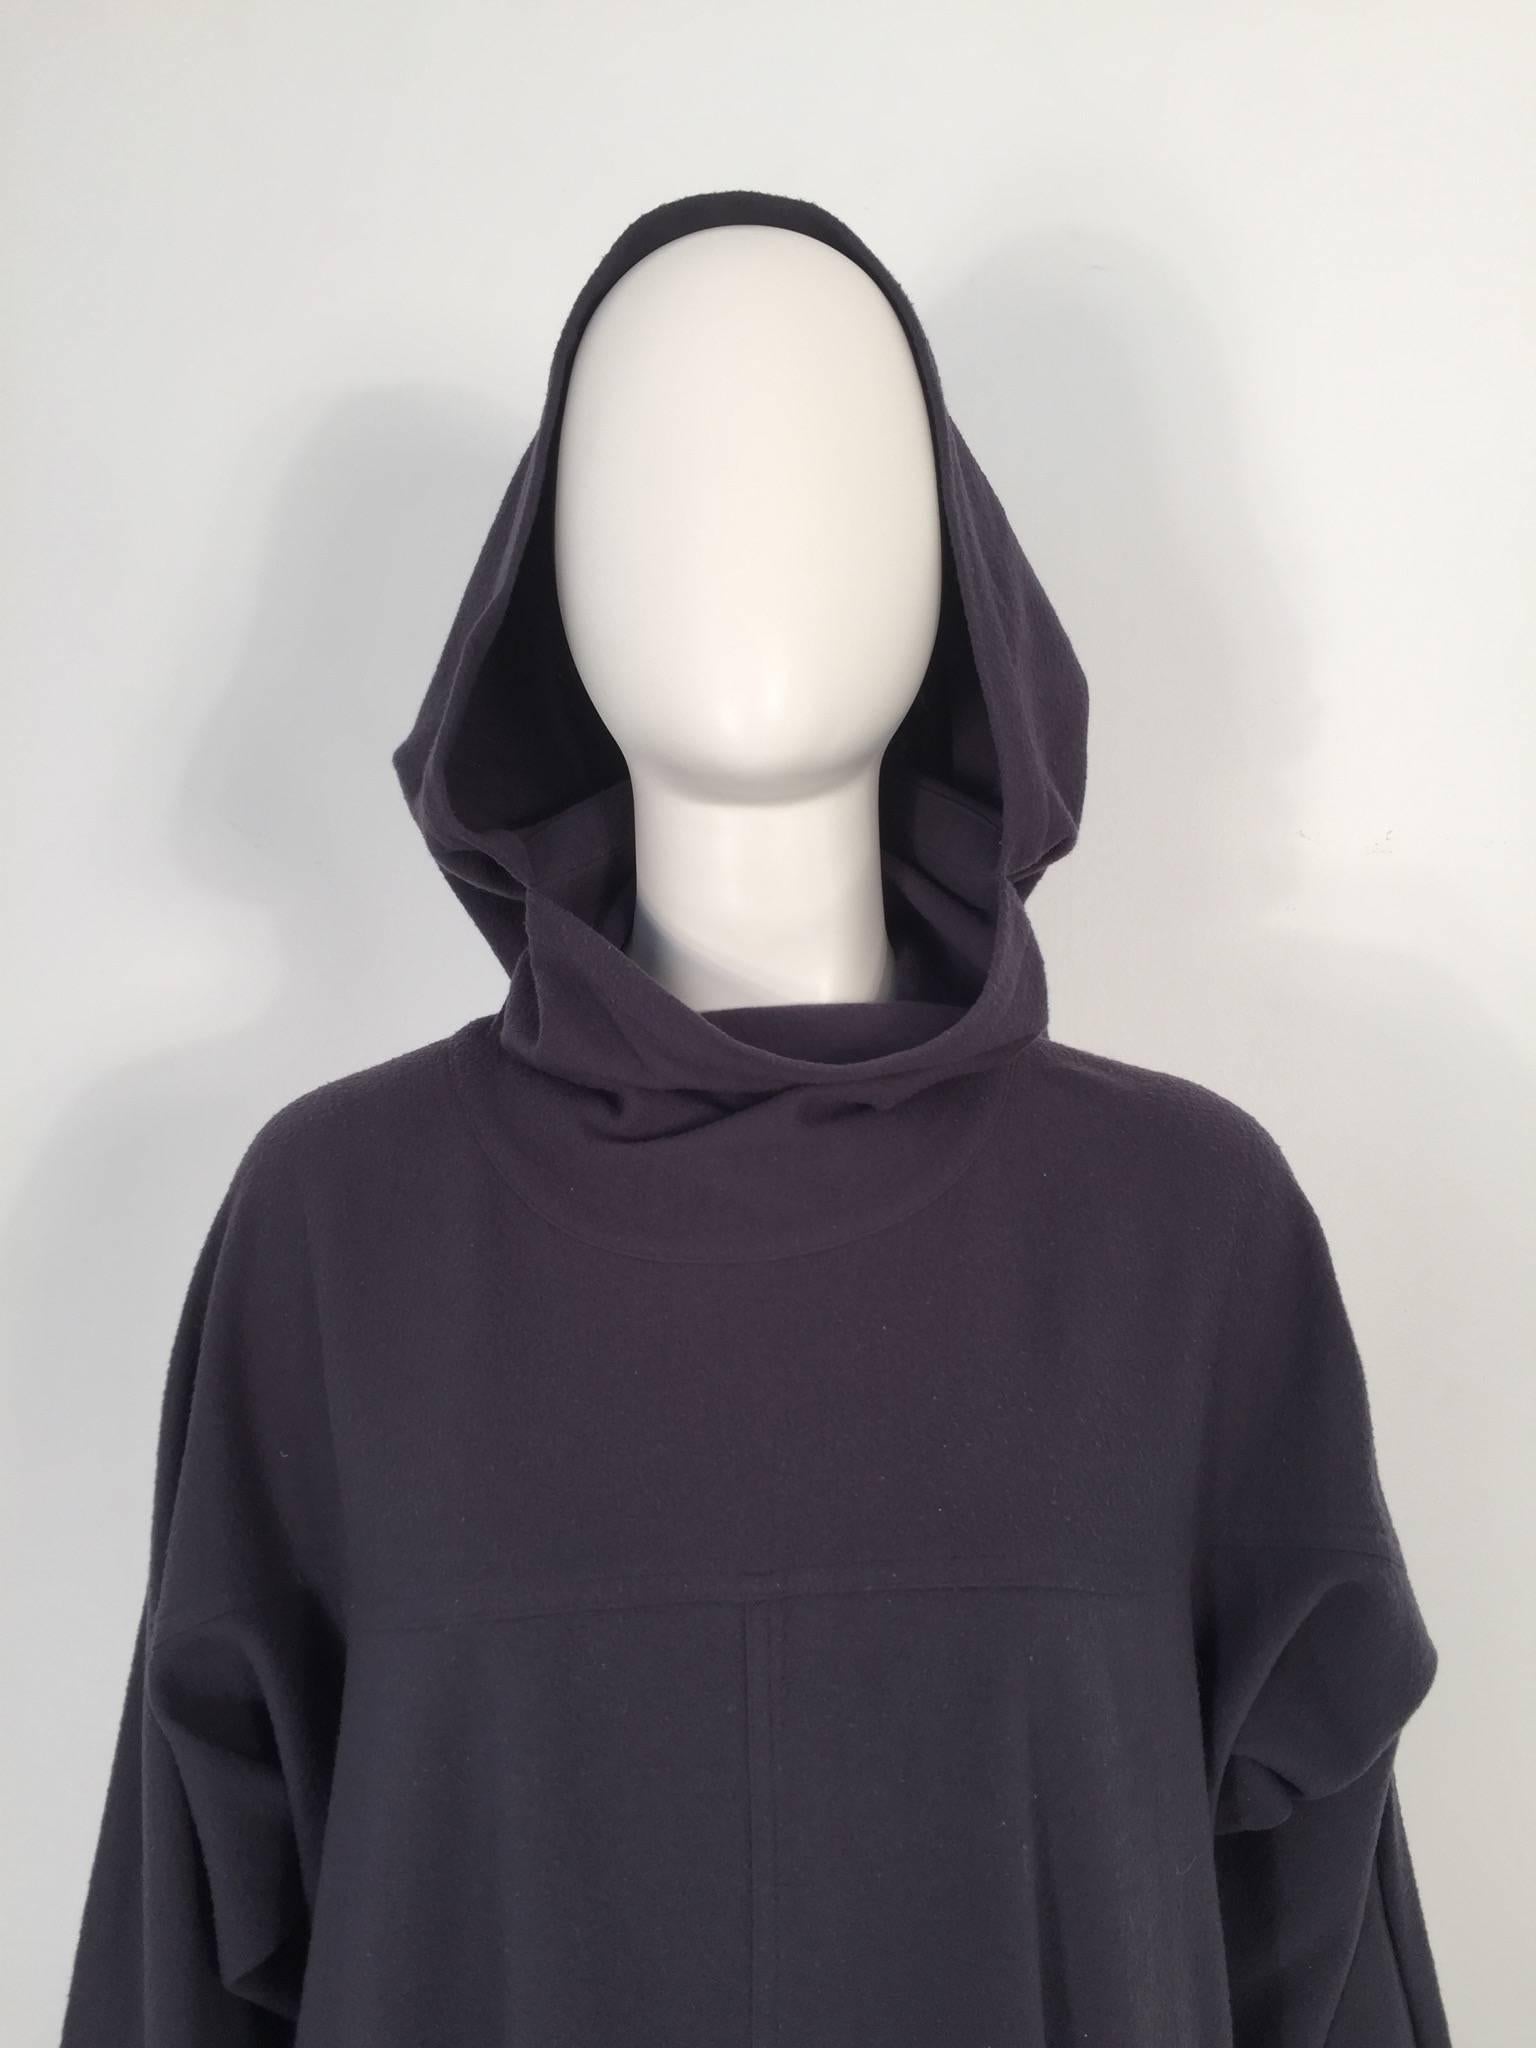 Issey Miyake 1980's fleece dress features 27'' sleeves and 20'' hood.

For International orders, please contact us for a shipping quote.
